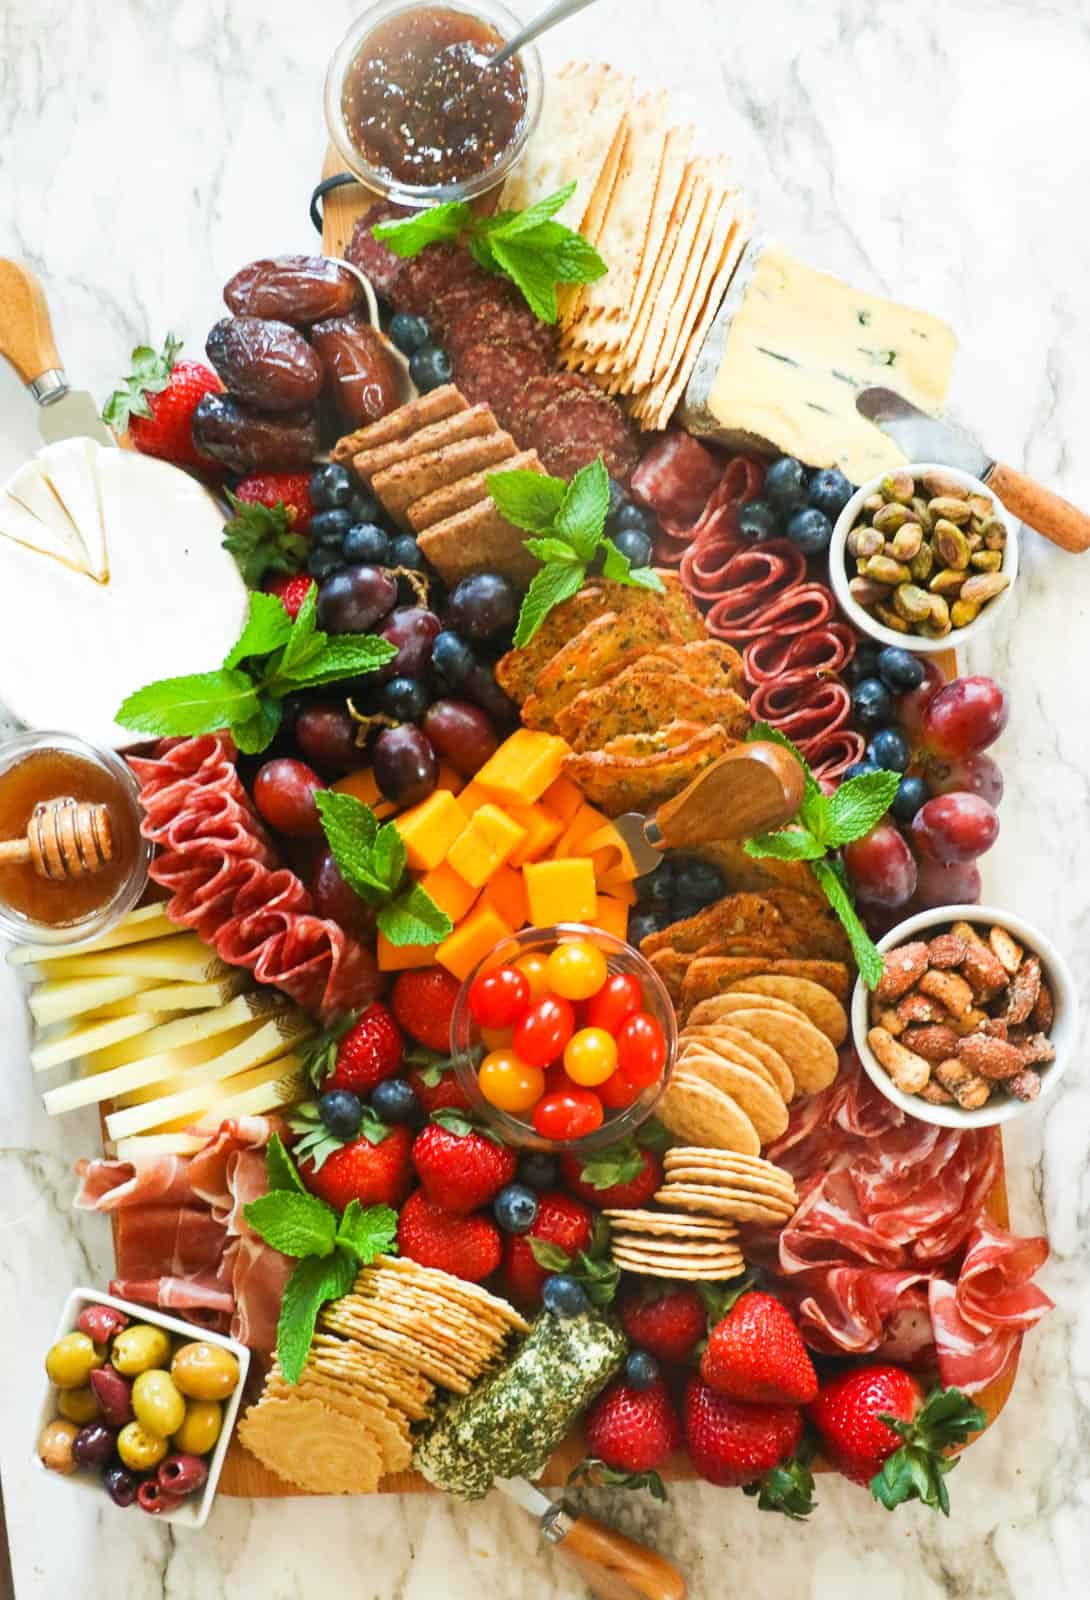 Charcuterie board with crackers, meats, fruits, and spreads